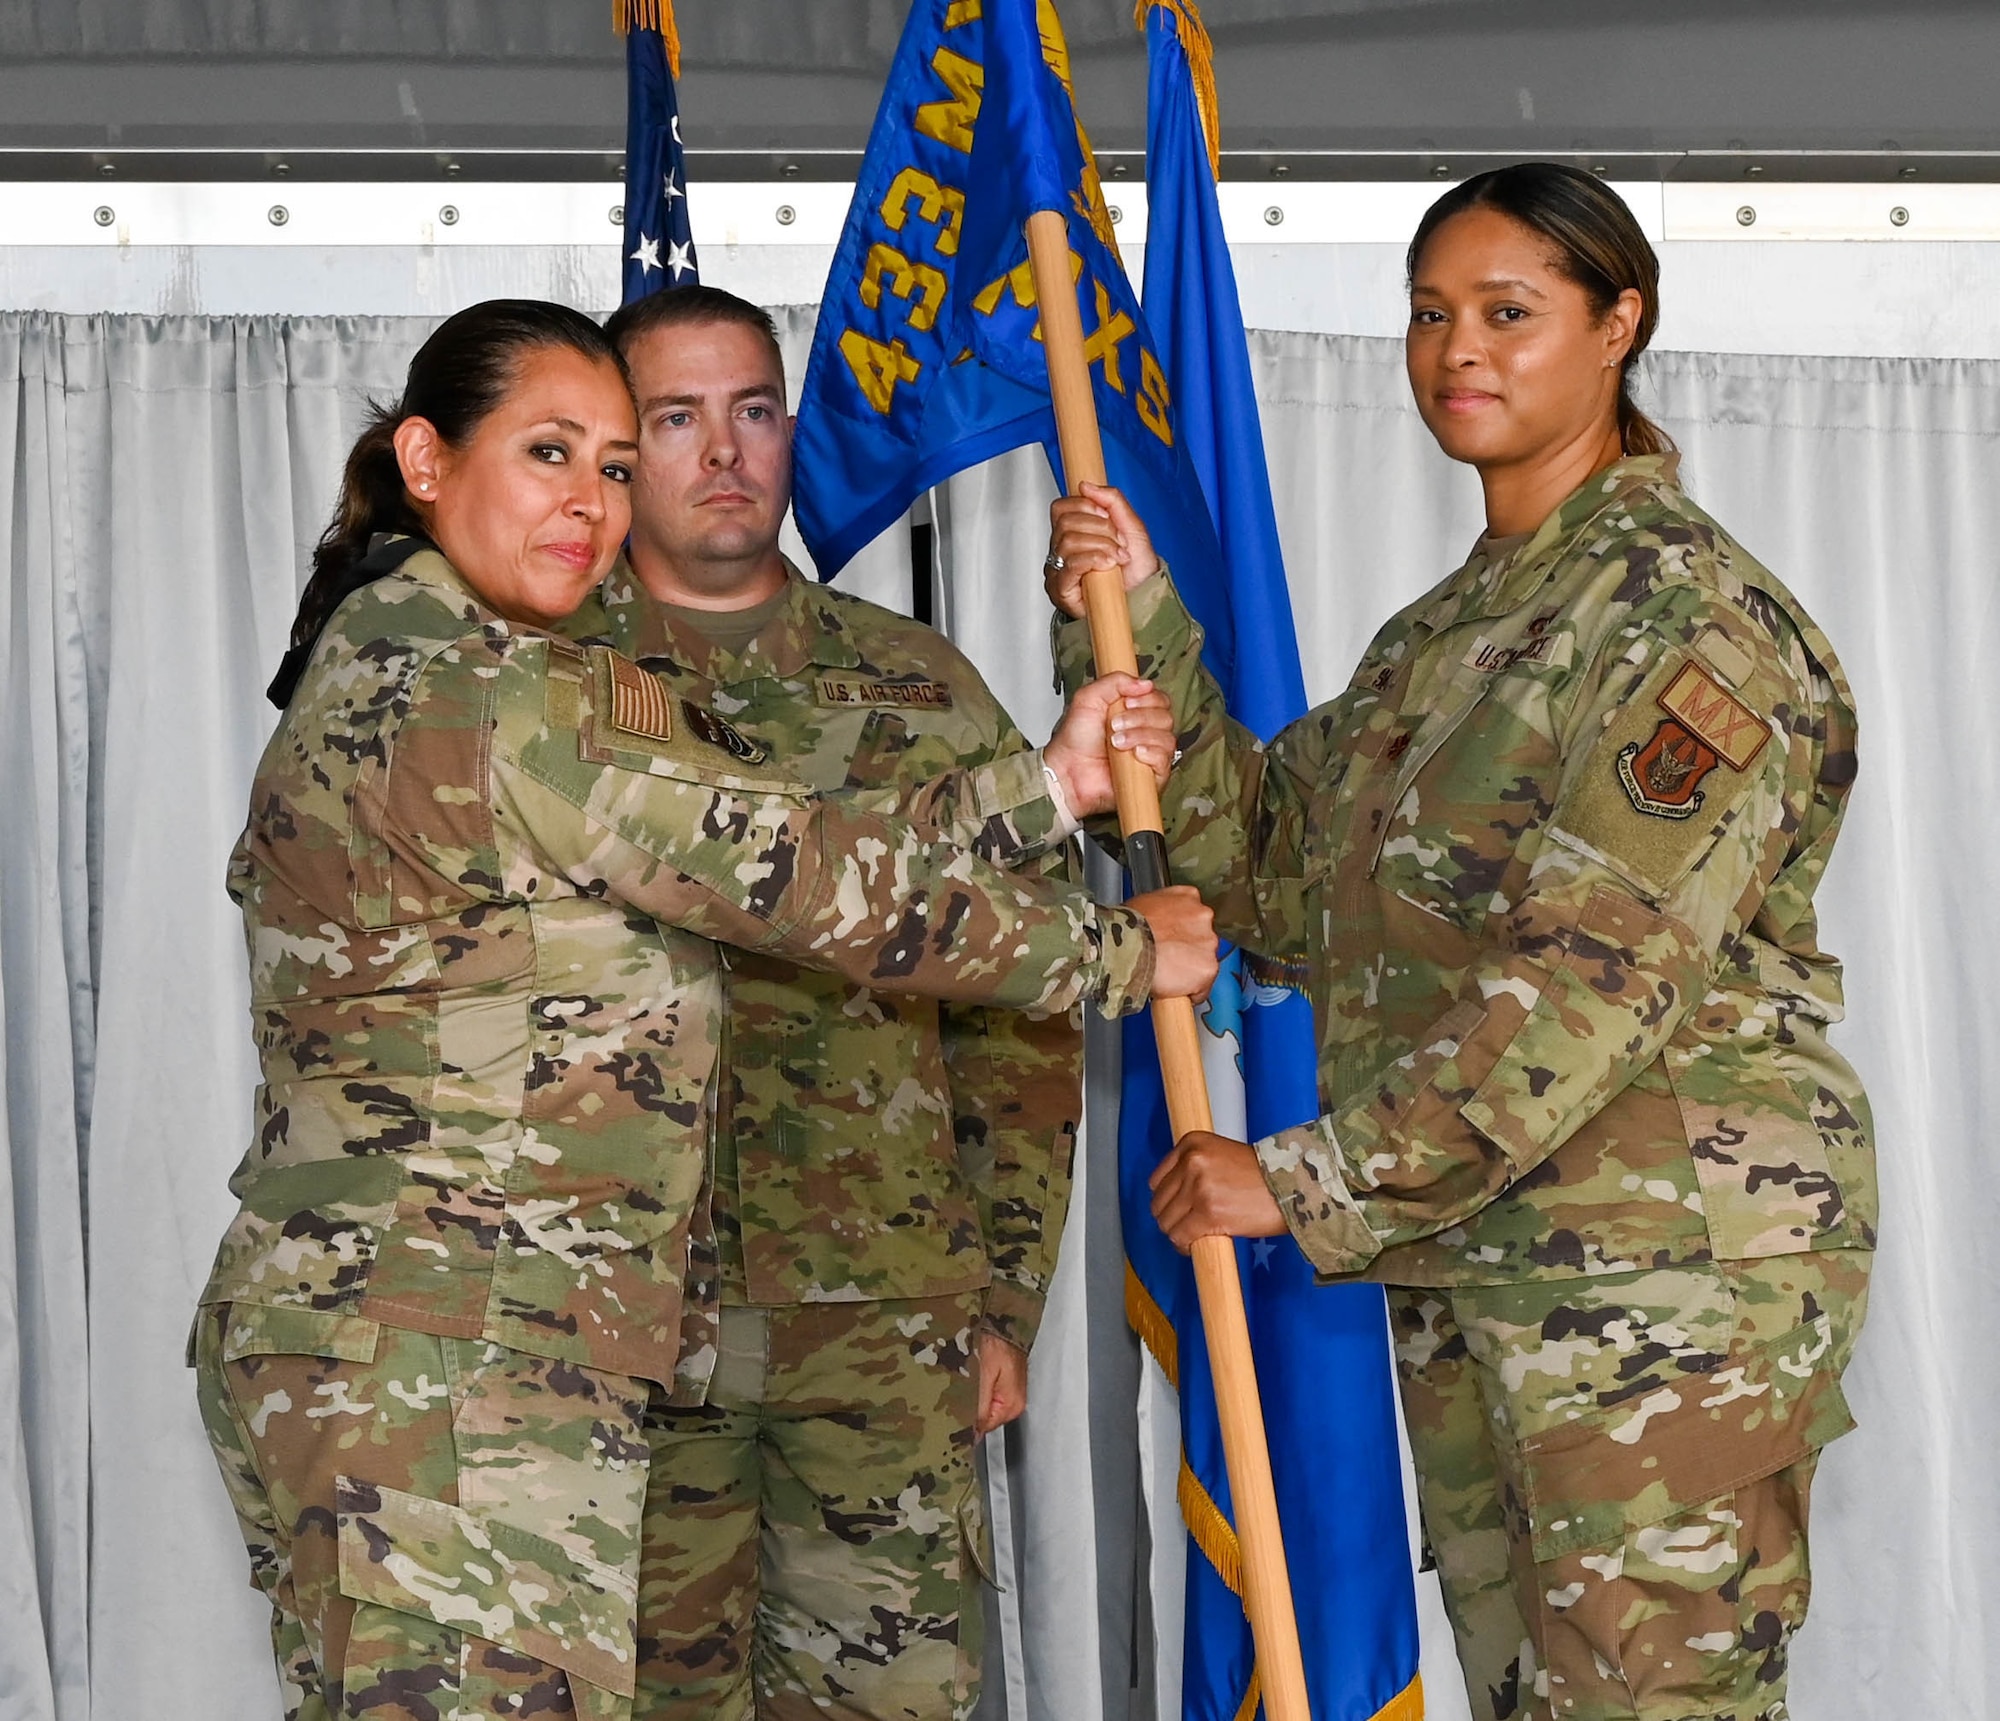 Lt. Col. Carla Martinez, 433rd Maintenance Group commander (left), presents the 433rd Maintenance Squadron guidon to Maj. Yolanda Seals during the 433rd MXS change of command ceremony at Joint Base San Antonio-Lackland, Texas, Sept. 10, 2022. Seals was previously the executive officer to the 340th Flying Training Group commander at Joint Base San Antonio-Randolph, Texas. (U.S. Air Force photo by Airman 1st Class Mark Colmenares)